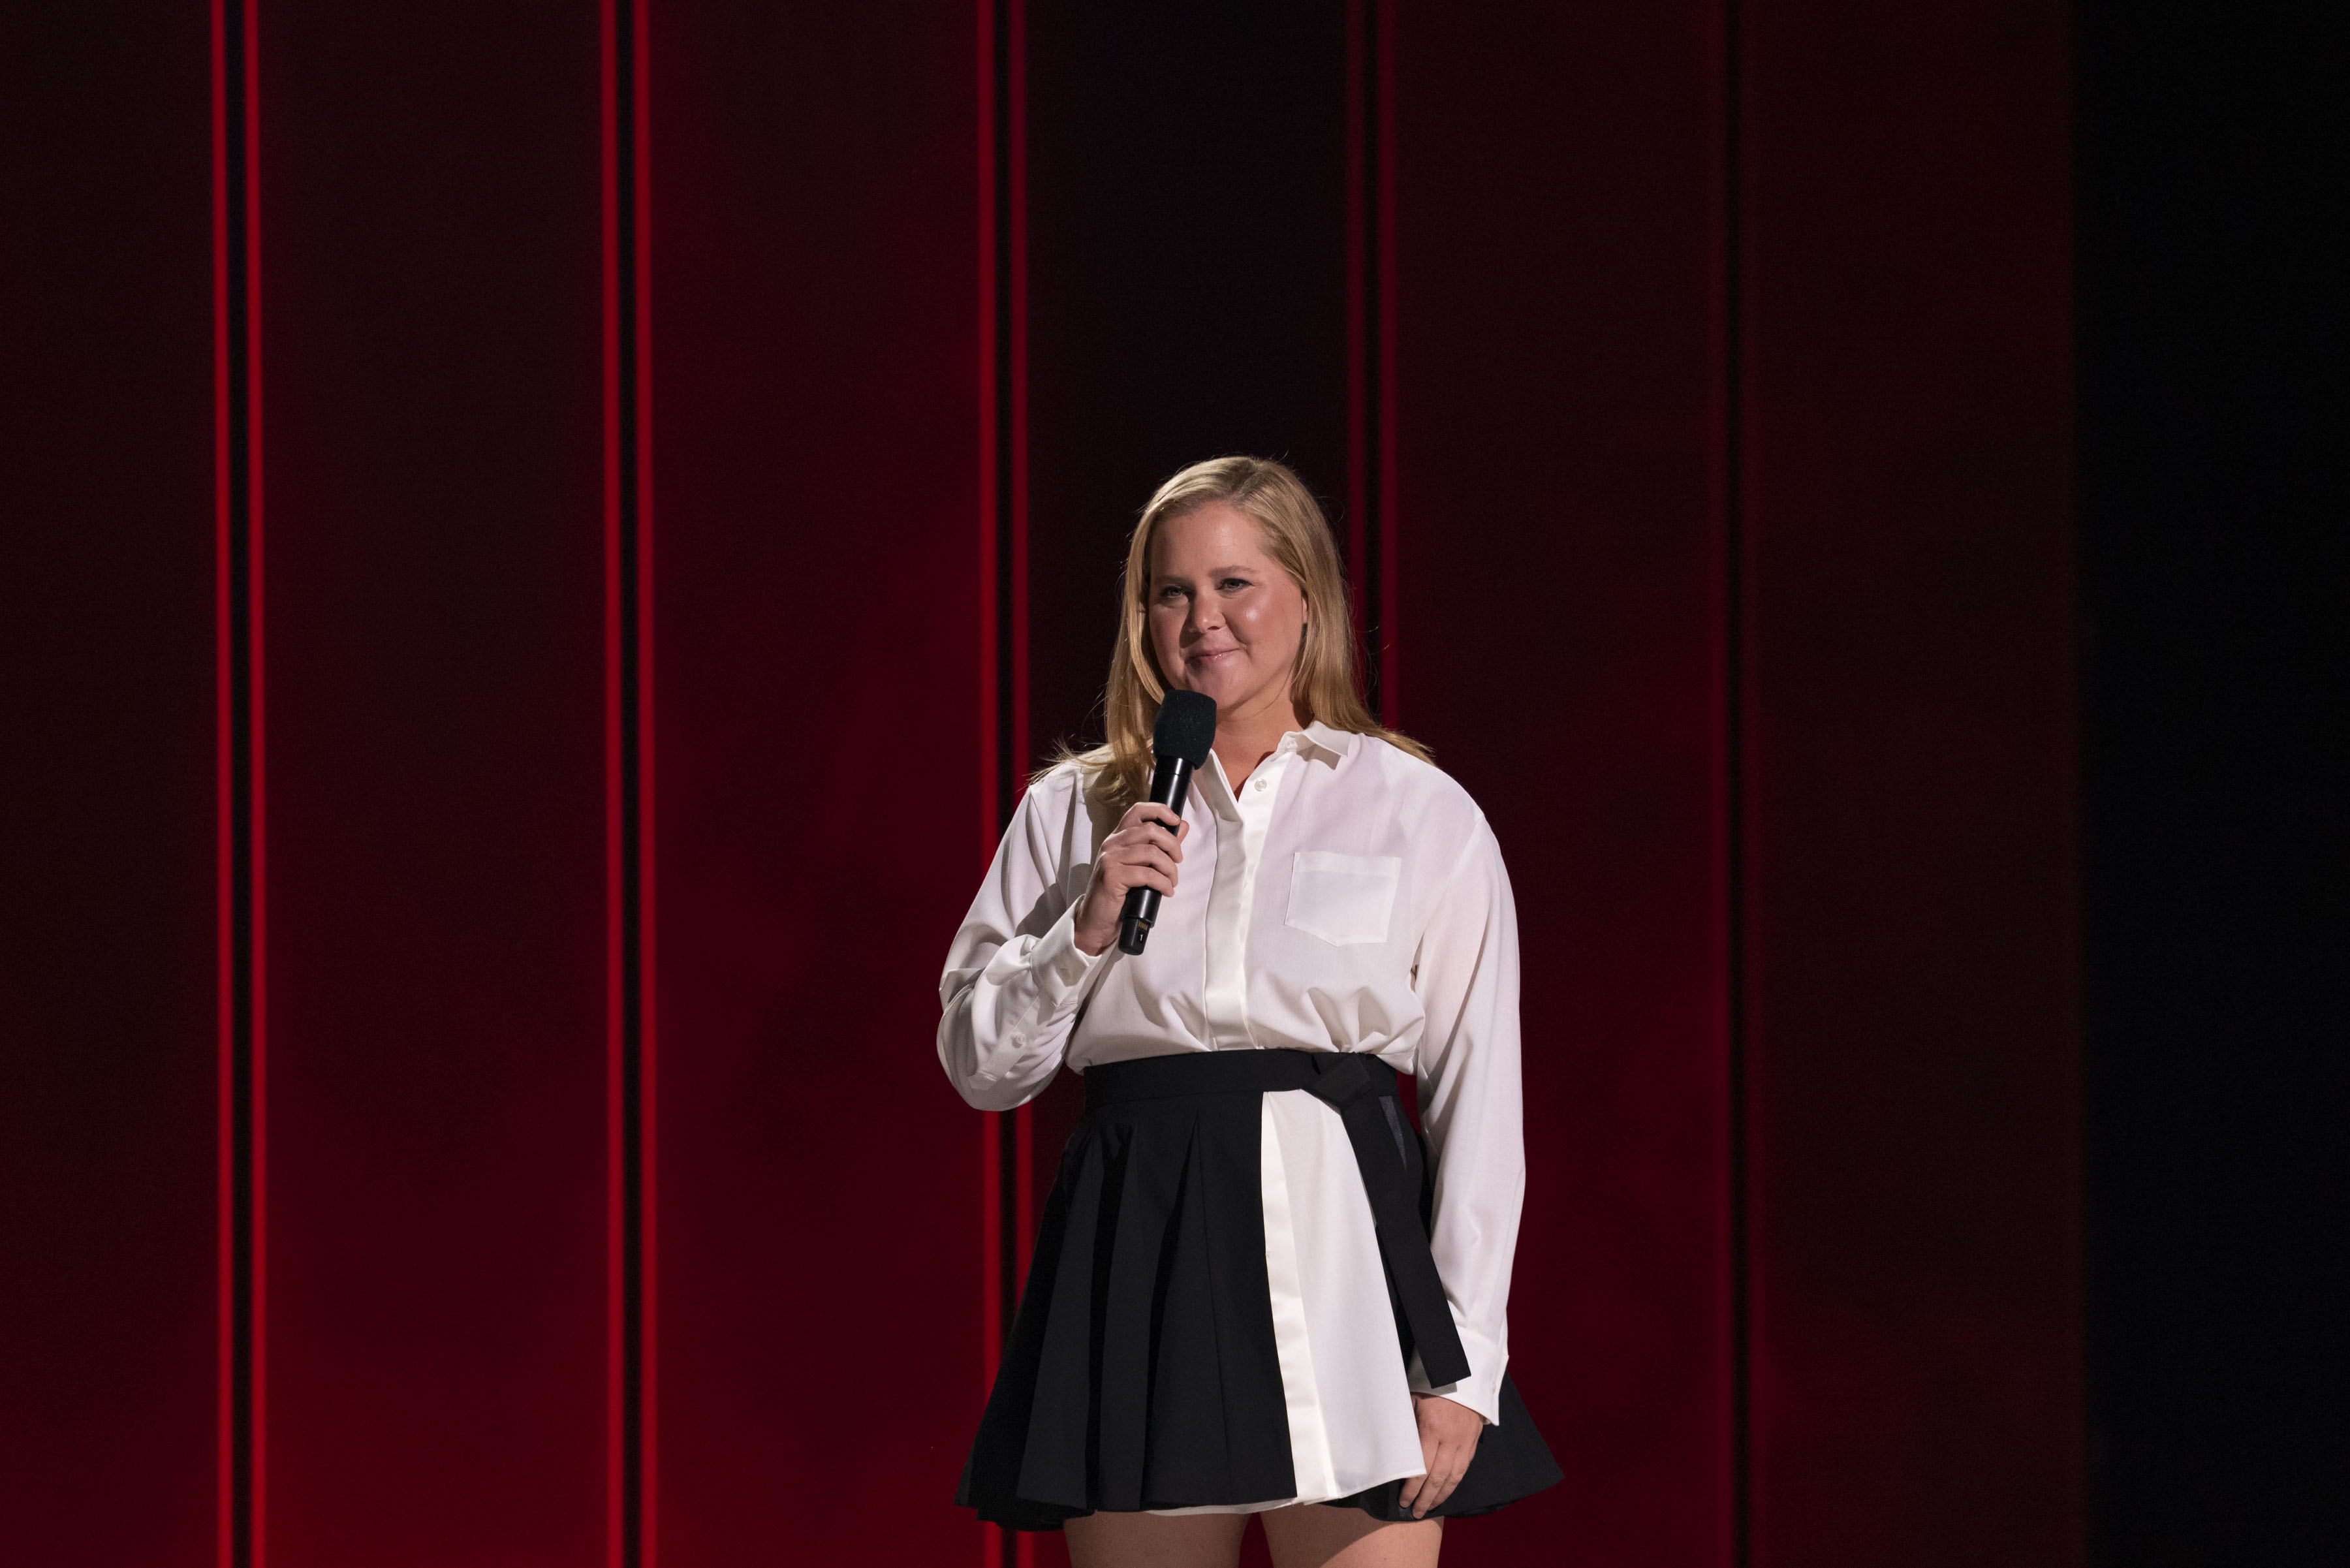 AMY SCHUMER AT NETFLIX IS A JOKE: THE FESTIVAL Photo credit: Marcus Russell Price / courtesy of Netflix